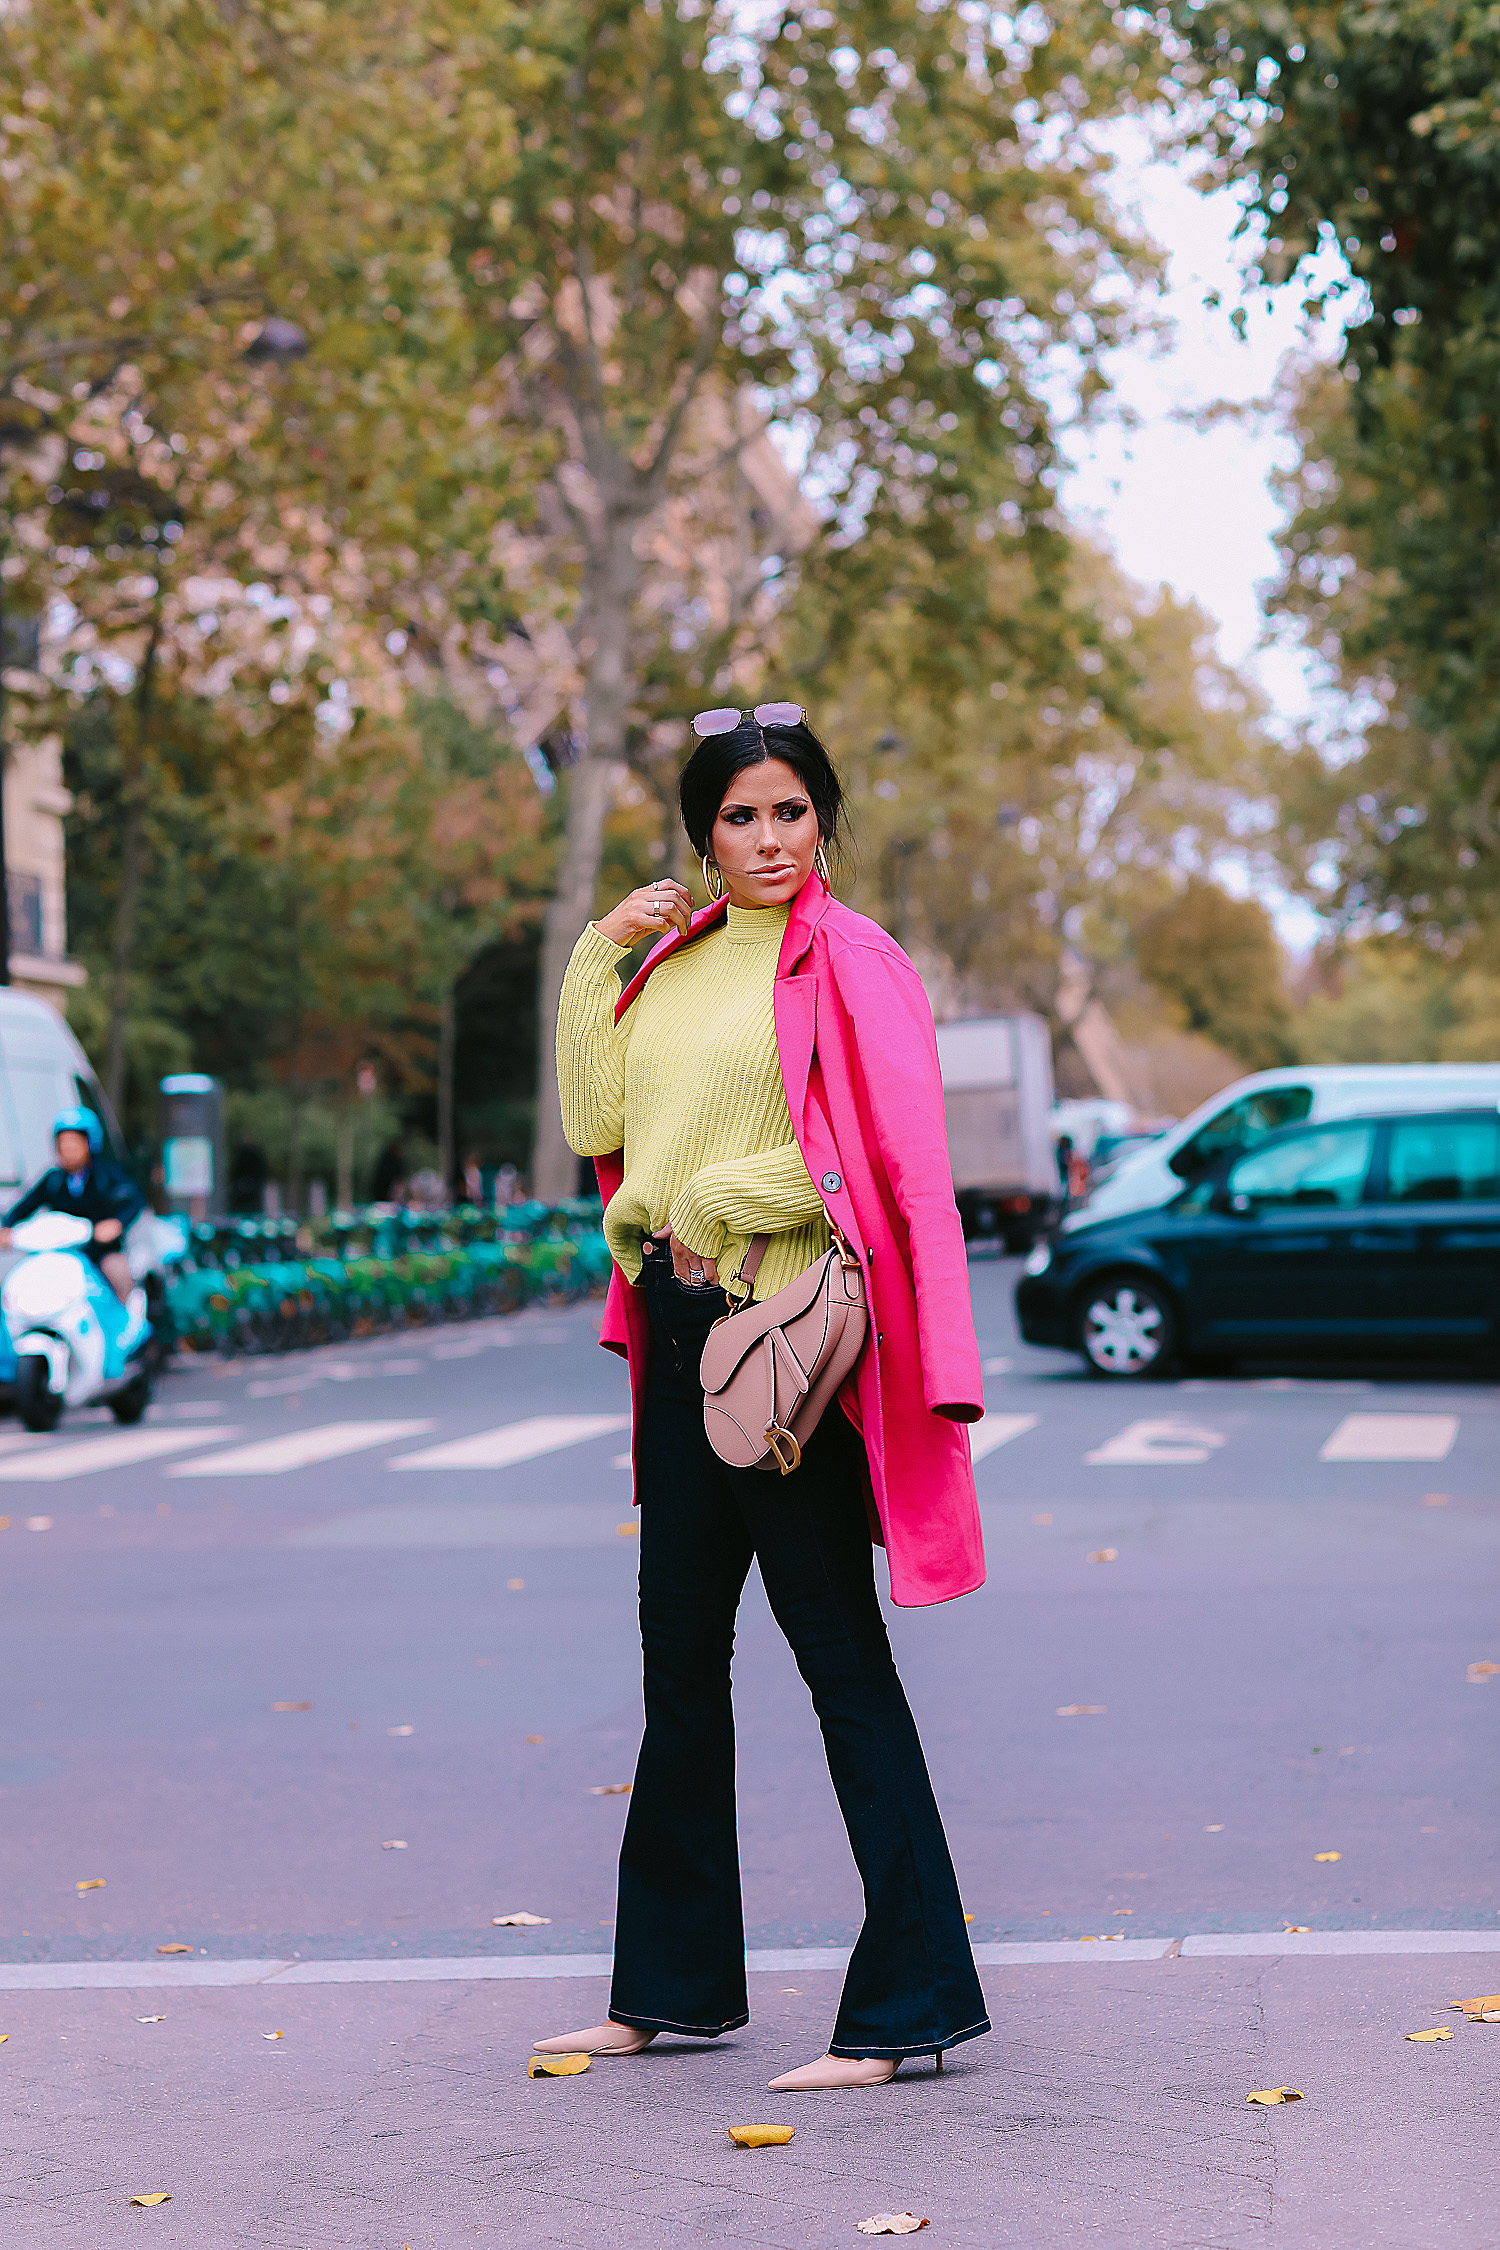 paris fall fashion 2019, fall fashion 2019, banana republic fall outfits 2019, paris outfit ideas fall and winter, what to wear in paris in october november, emily ann gemma-2 | Do You Like Neon Or Neutrals?! Two Everyday Fall Outfits by popular Oklahoma fashion blog, The Sweetest Thing: image of a woman outside in Paris and wearing a Banana Republic High-Rise Flare Jean, Banana Republic Double-Faced Topcoat, and Banana Republic Chunky High Crew-Neck Sweater.